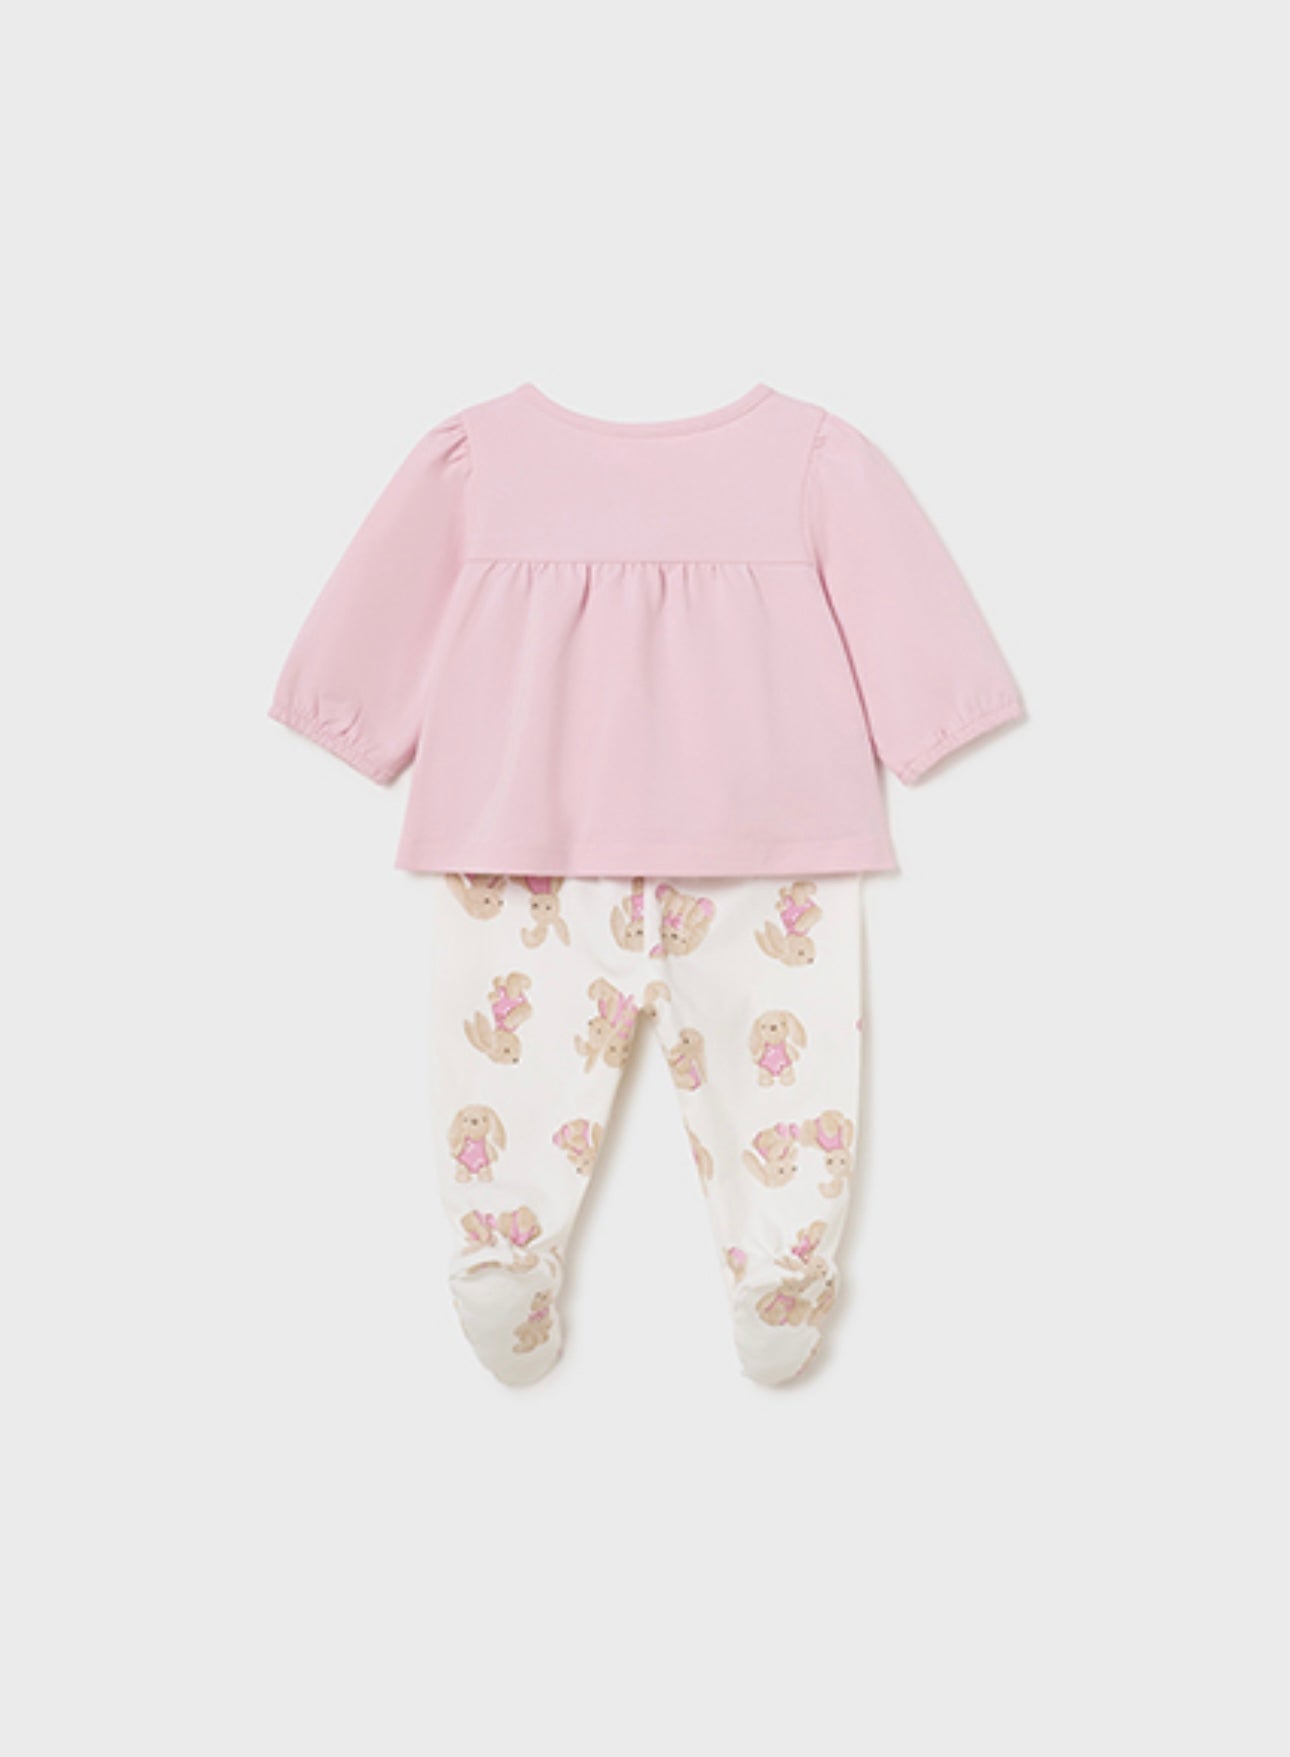 Mayoral Baby Girls Bunny 2 Piece Outfit